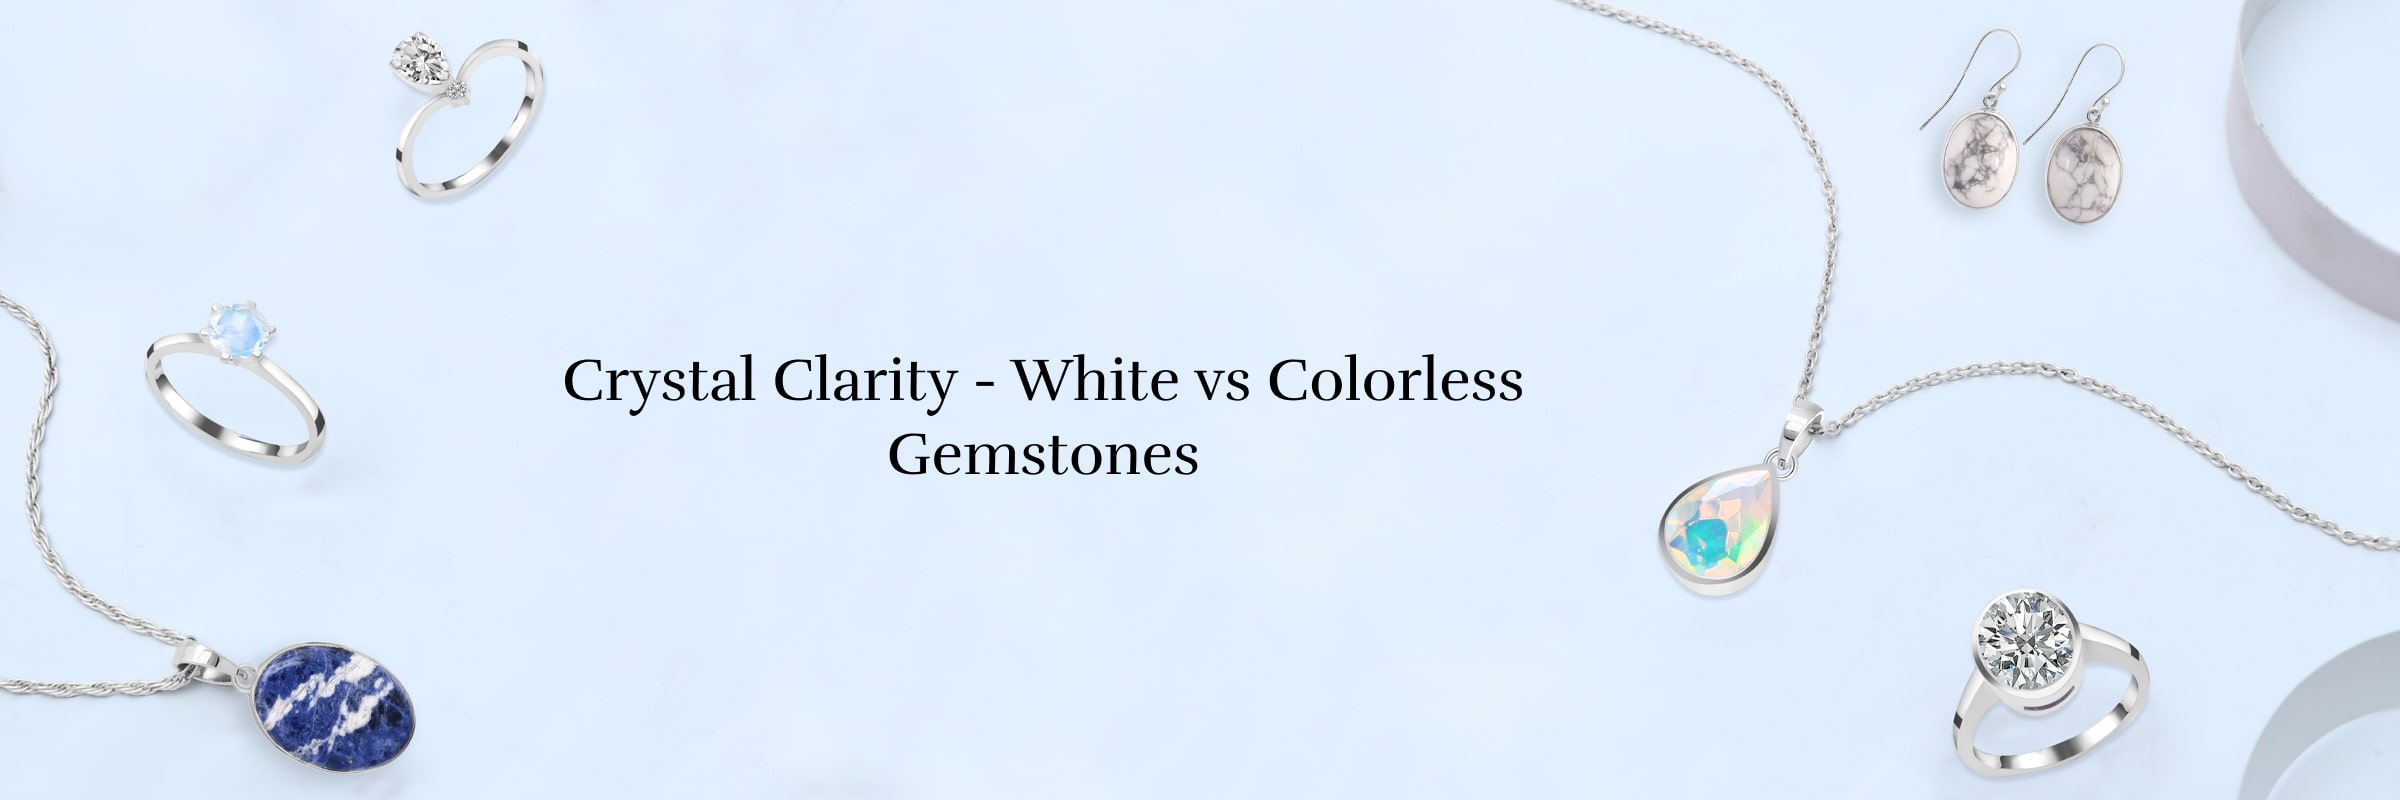 White Gemstone and Colorless Stones